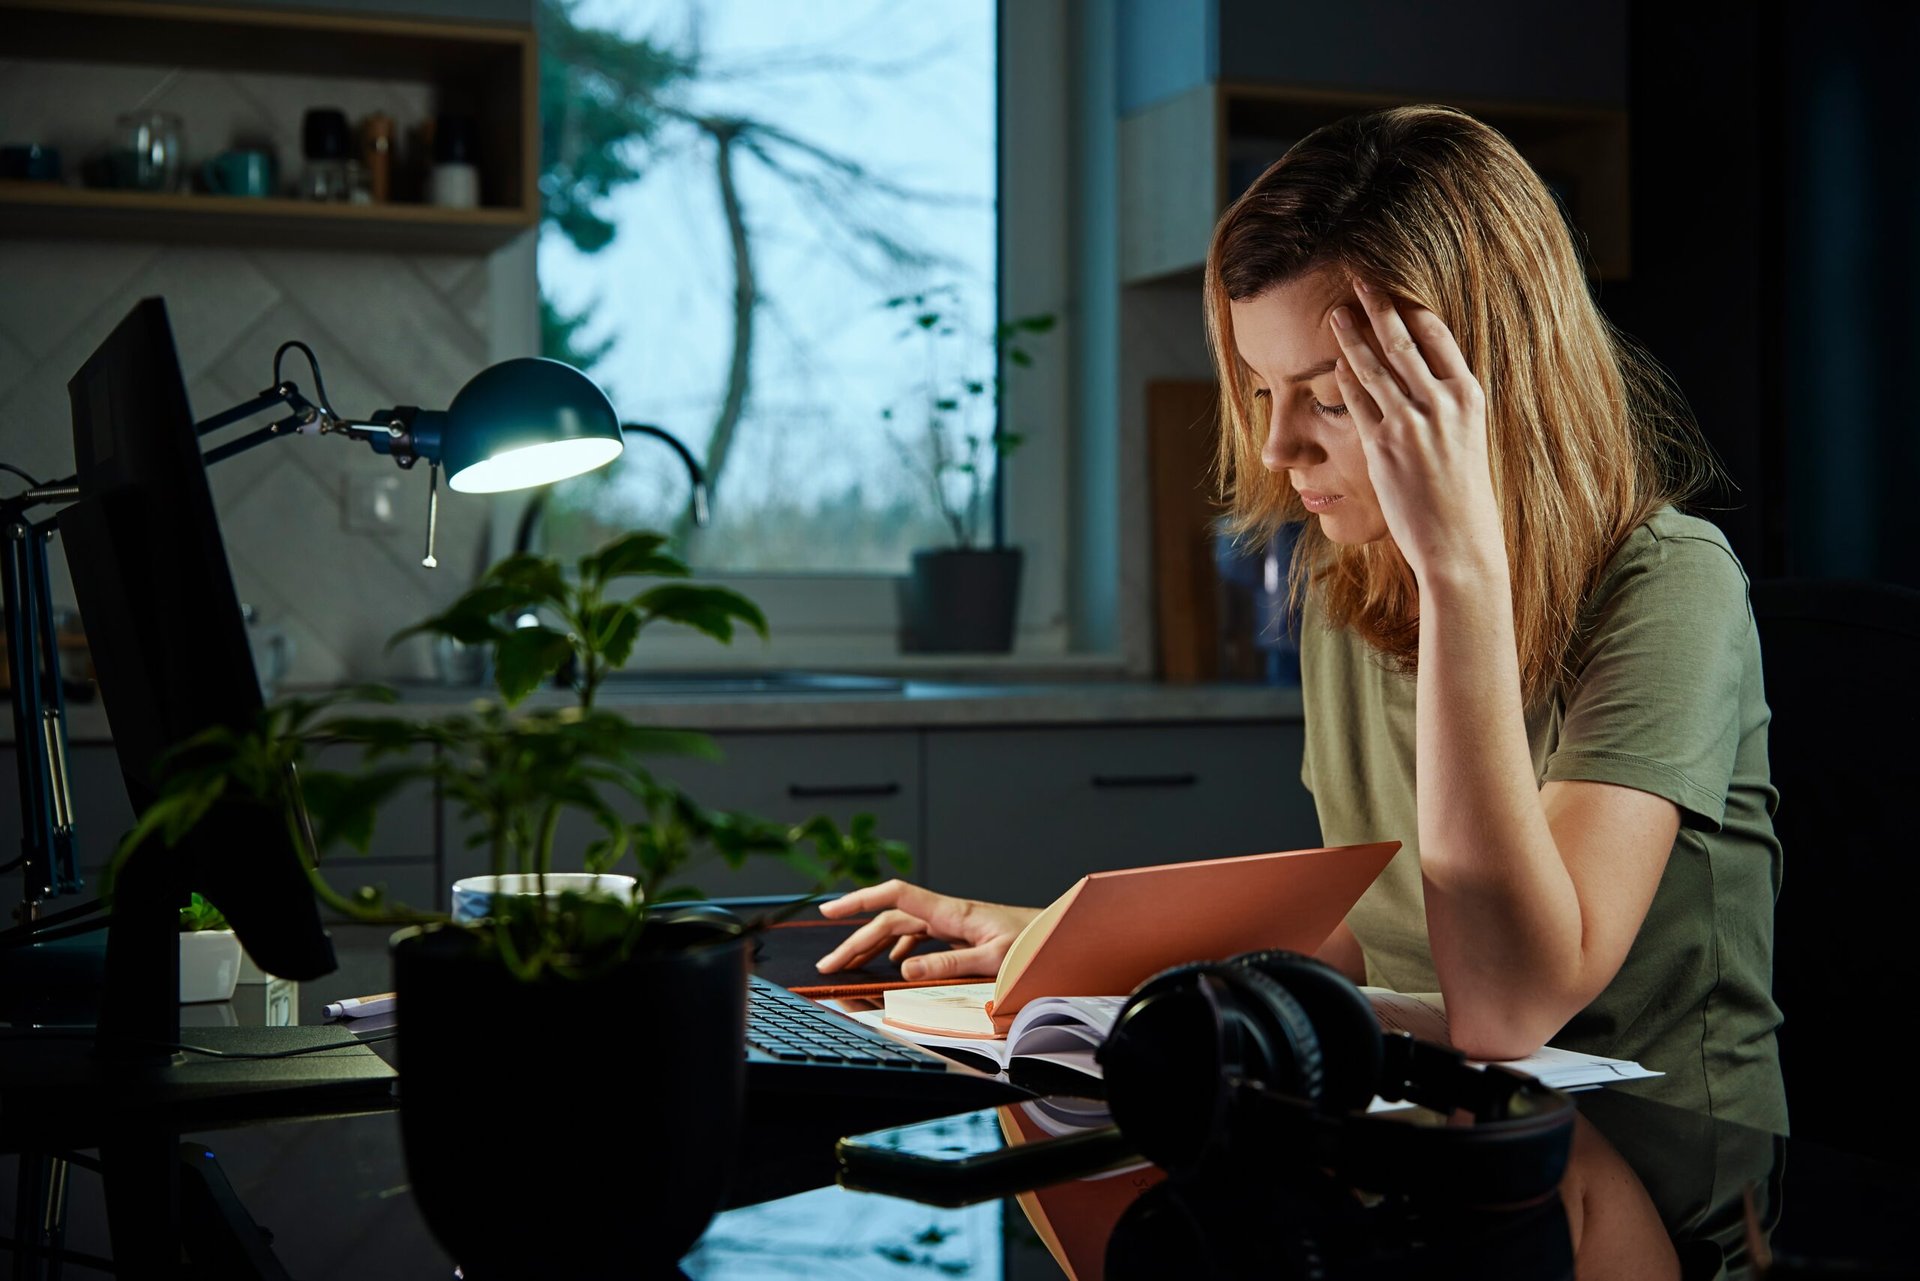 Stressed woman working from home late into the evening and suffering from burnout at her computer desk